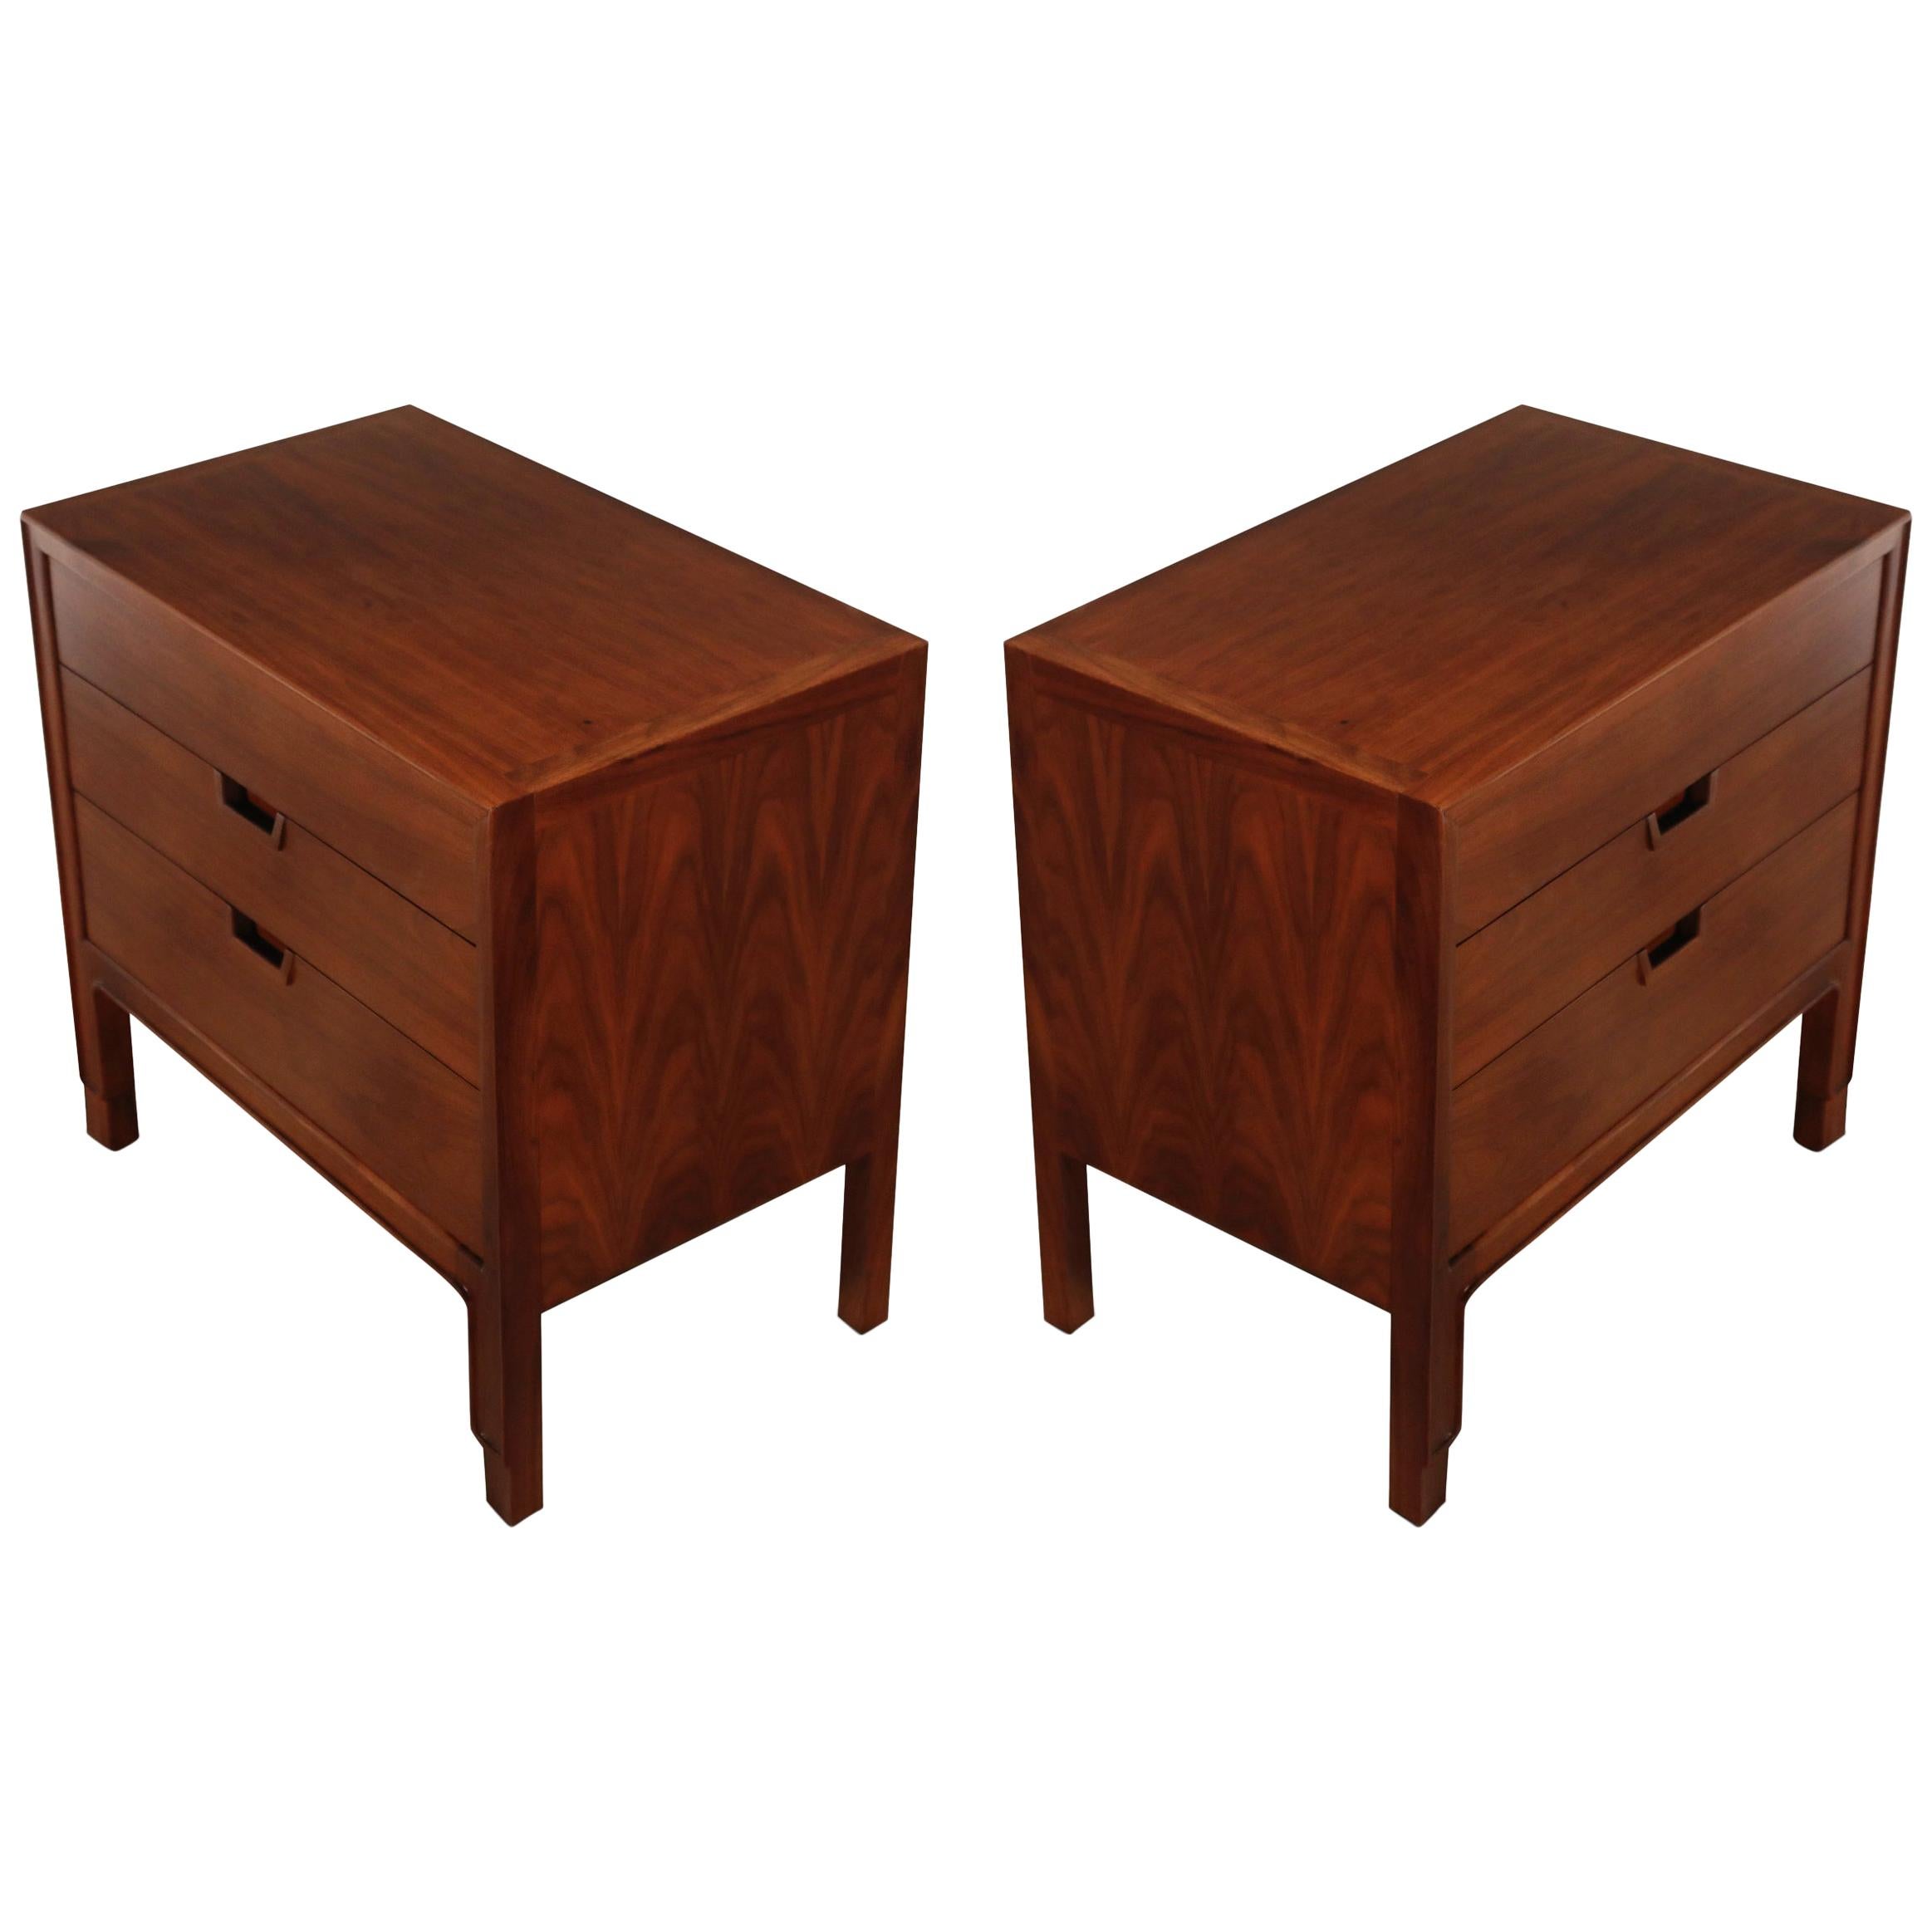 Pair of Refinished Nightstands or End Tables by John Stuart for Janus Collection